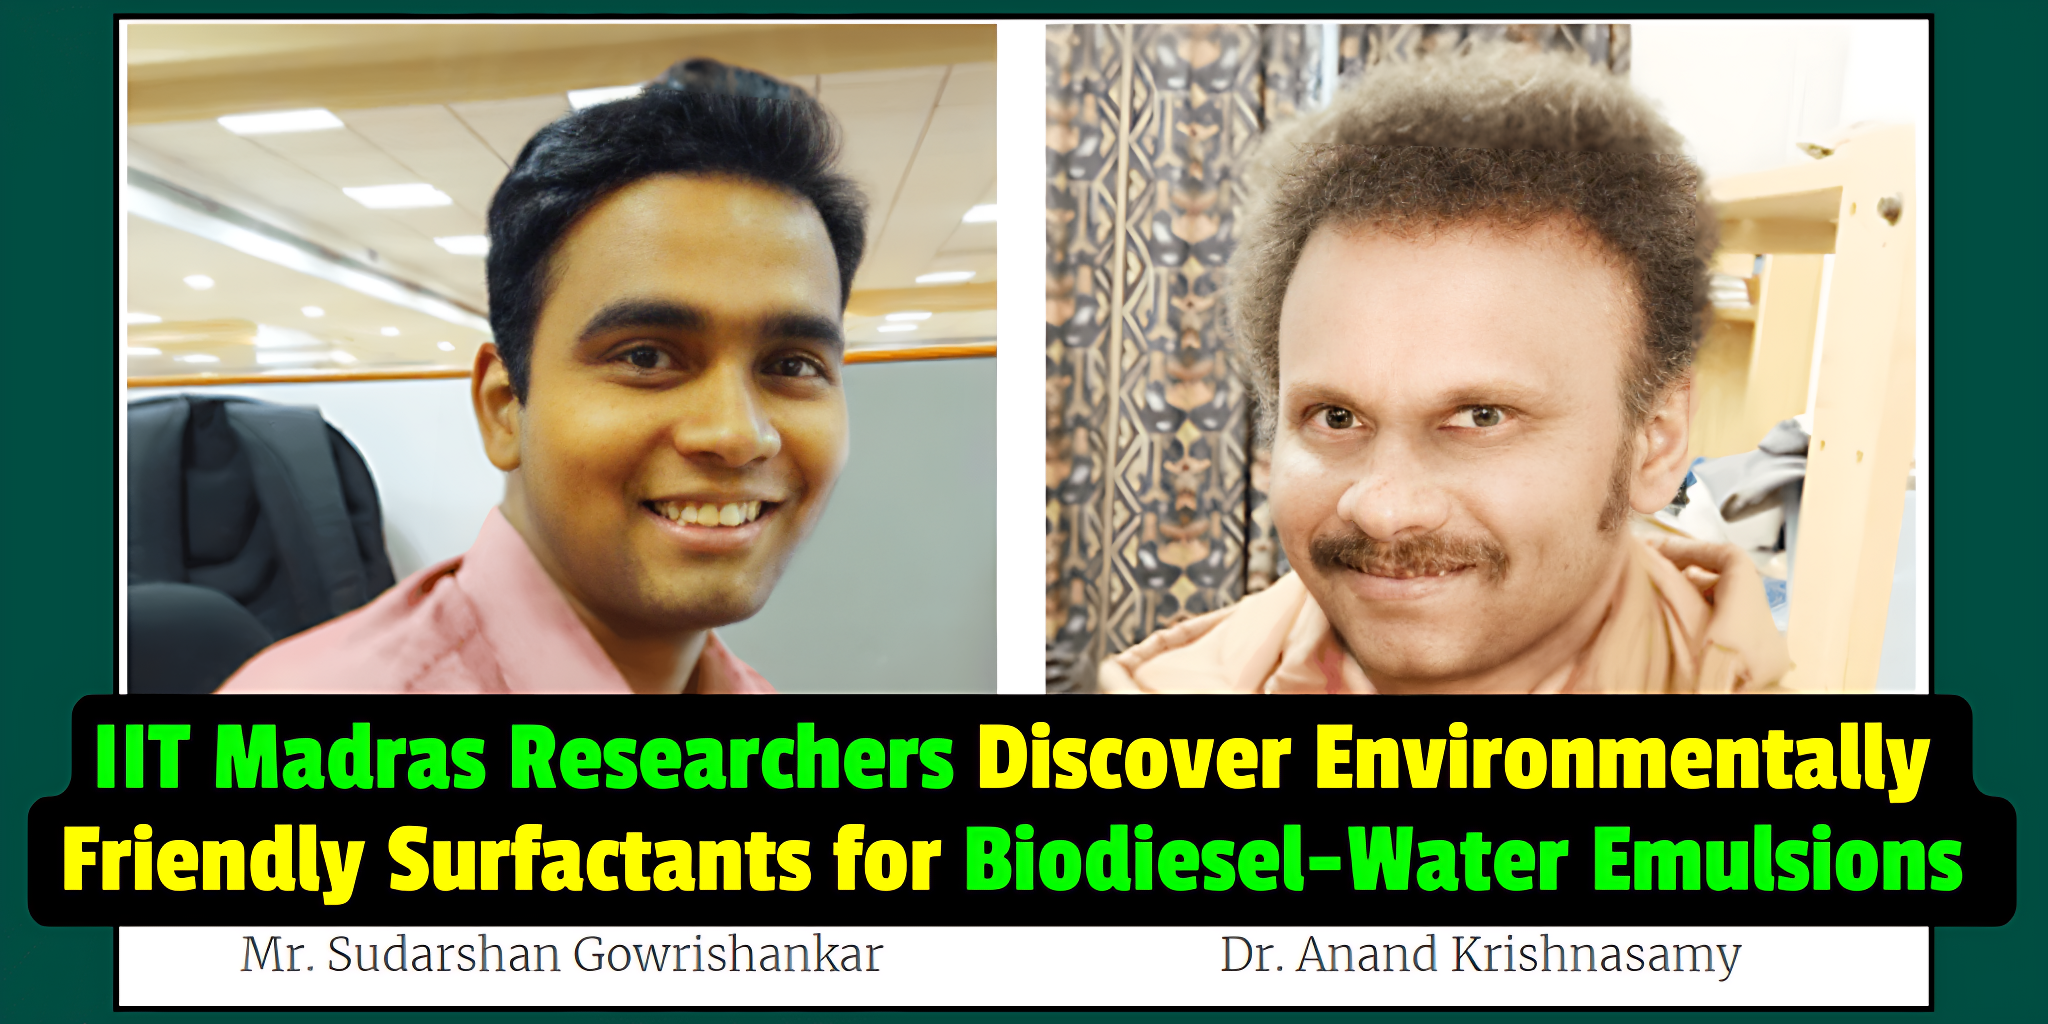 Revolutionizing Biodiesel: IIT Madras Study Paves the Way for Greener Surfactants